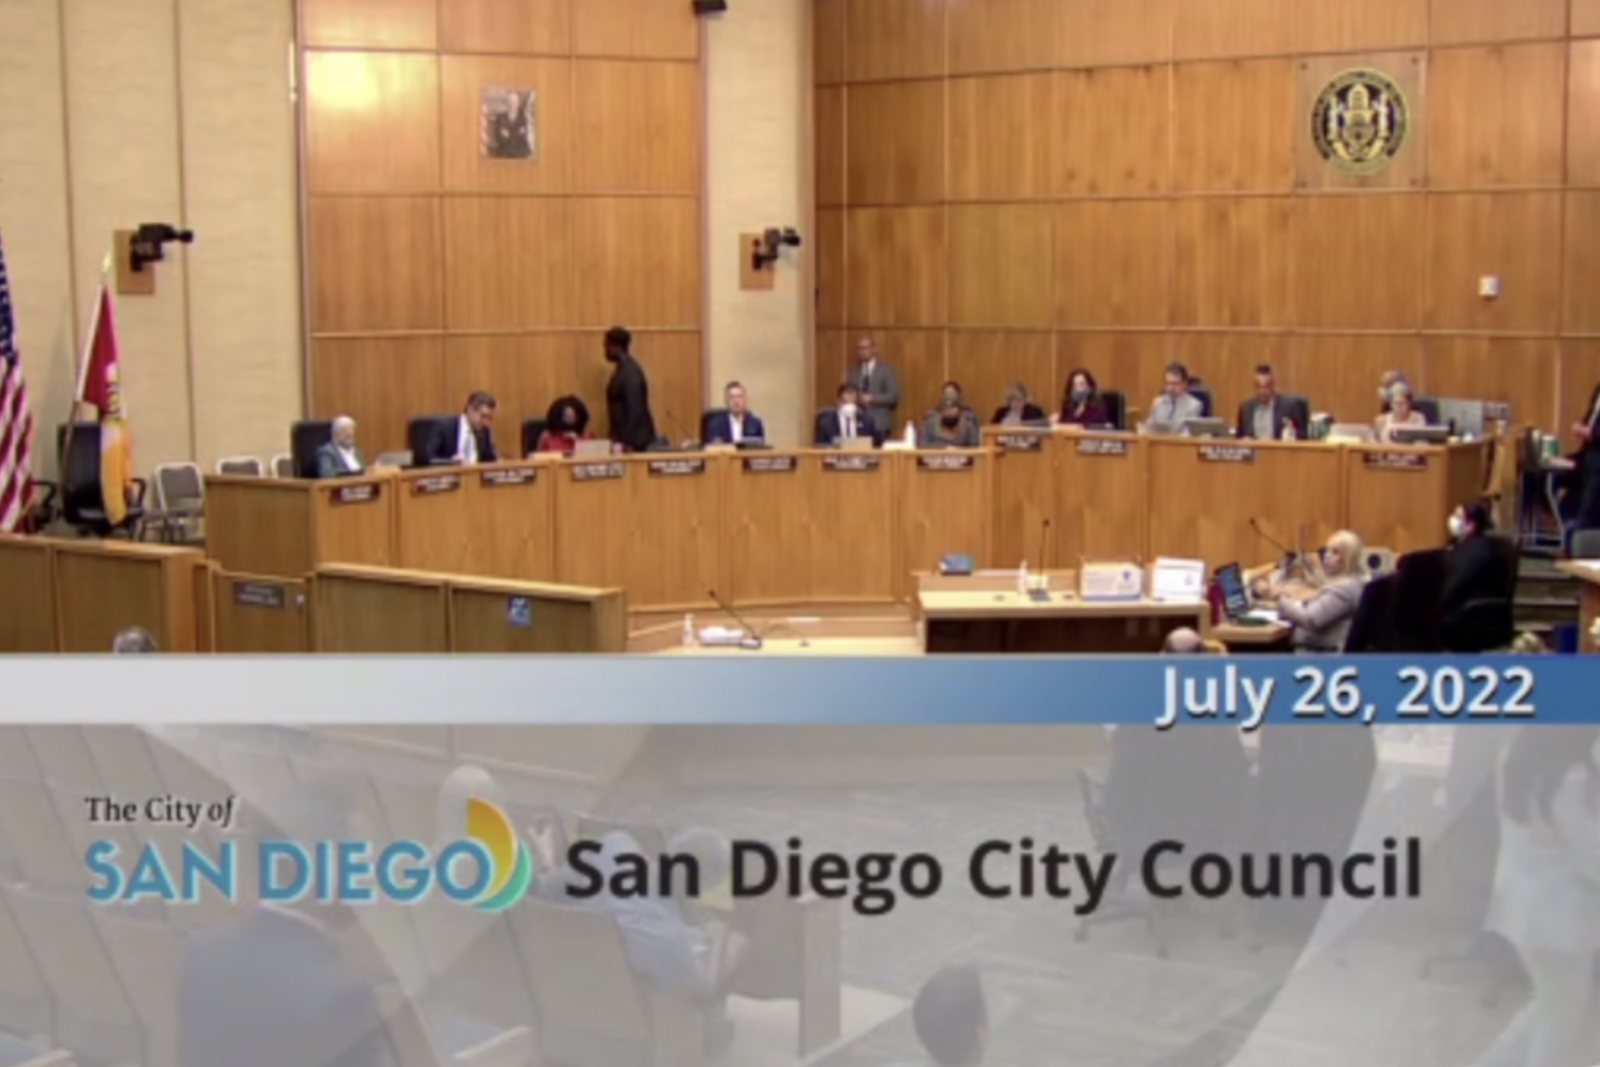 San Diego City Council Cover Image 072622